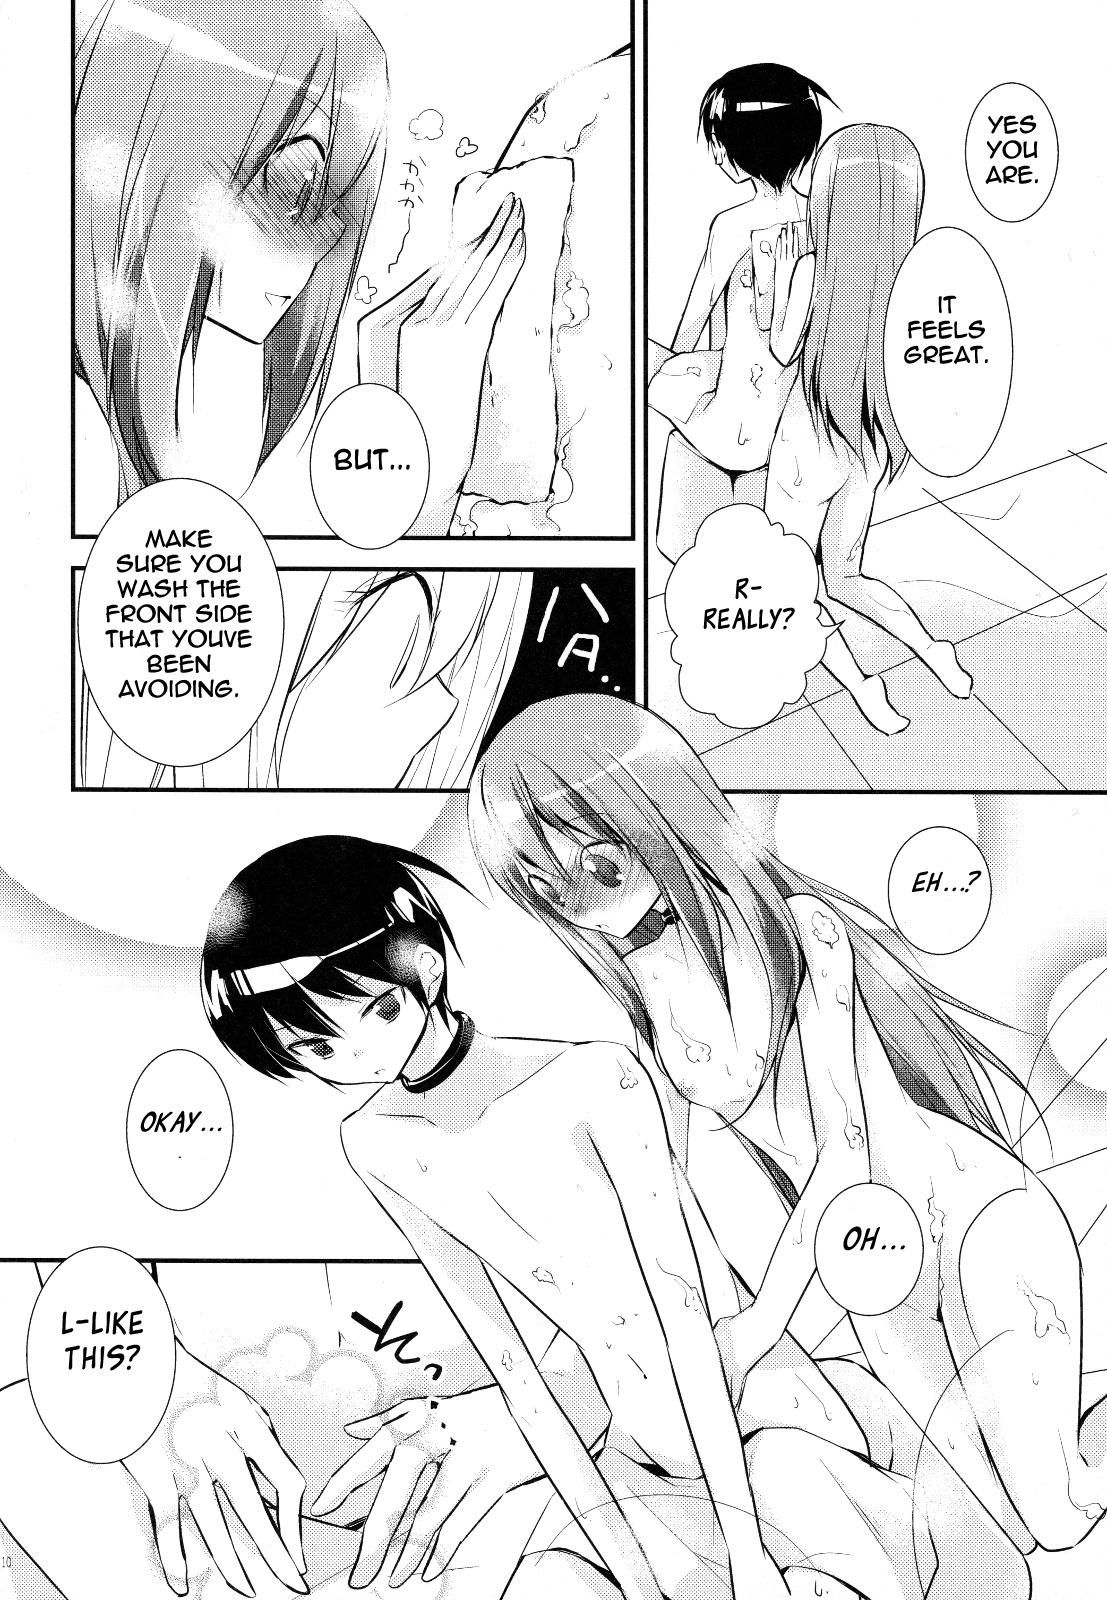 Best Blowjobs Kamisama no Hentai Play Nikkichou 4 | Kamisama's Hentai Play Diary 4 - The world god only knows Insertion - Page 9